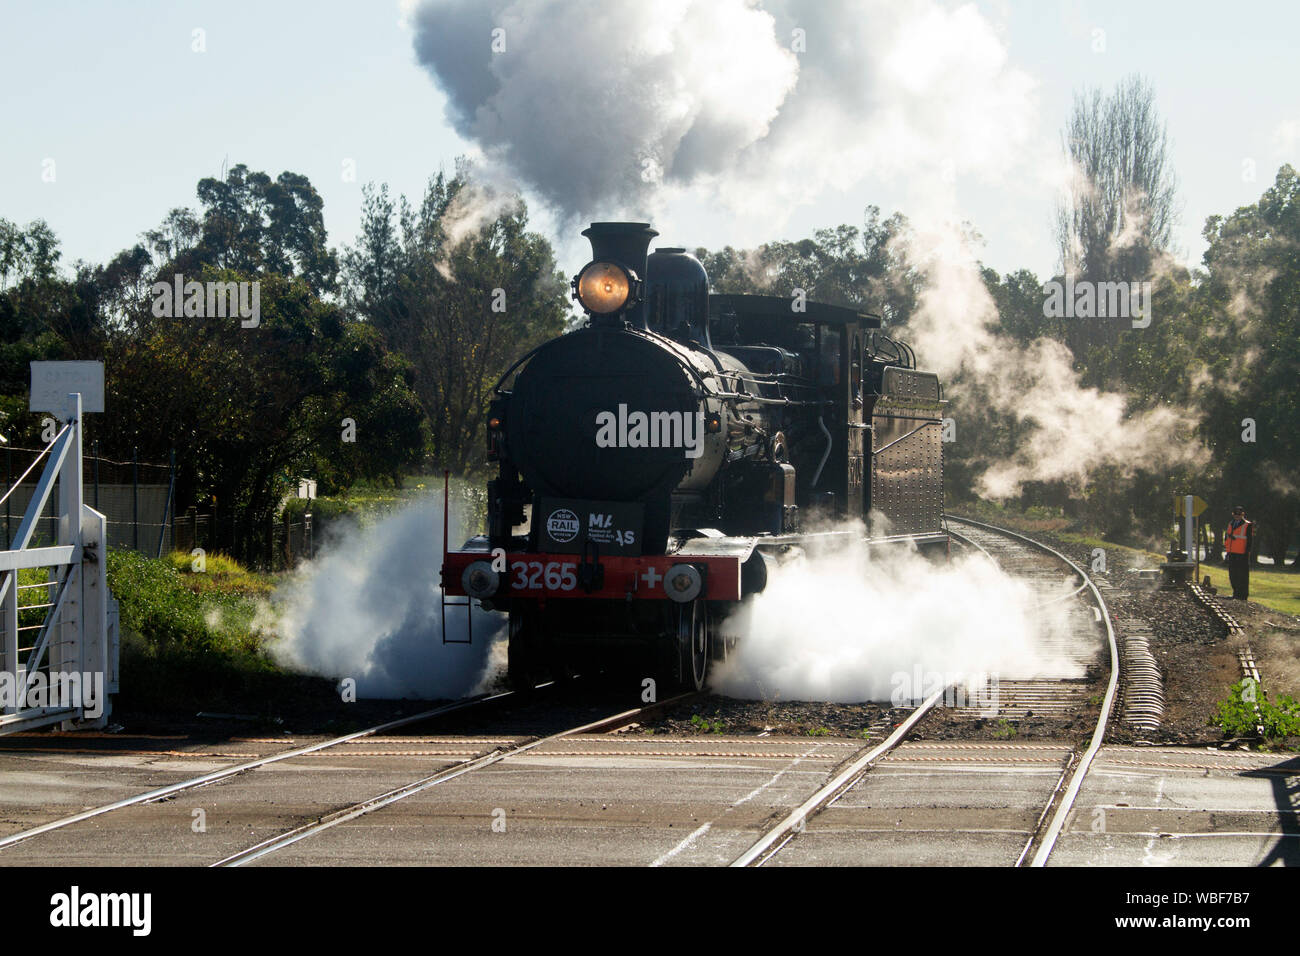 Restored steam train on railway tracks surrounded by clouds of steam at Thirlmere Railway Museum NSW Australia Stock Photo